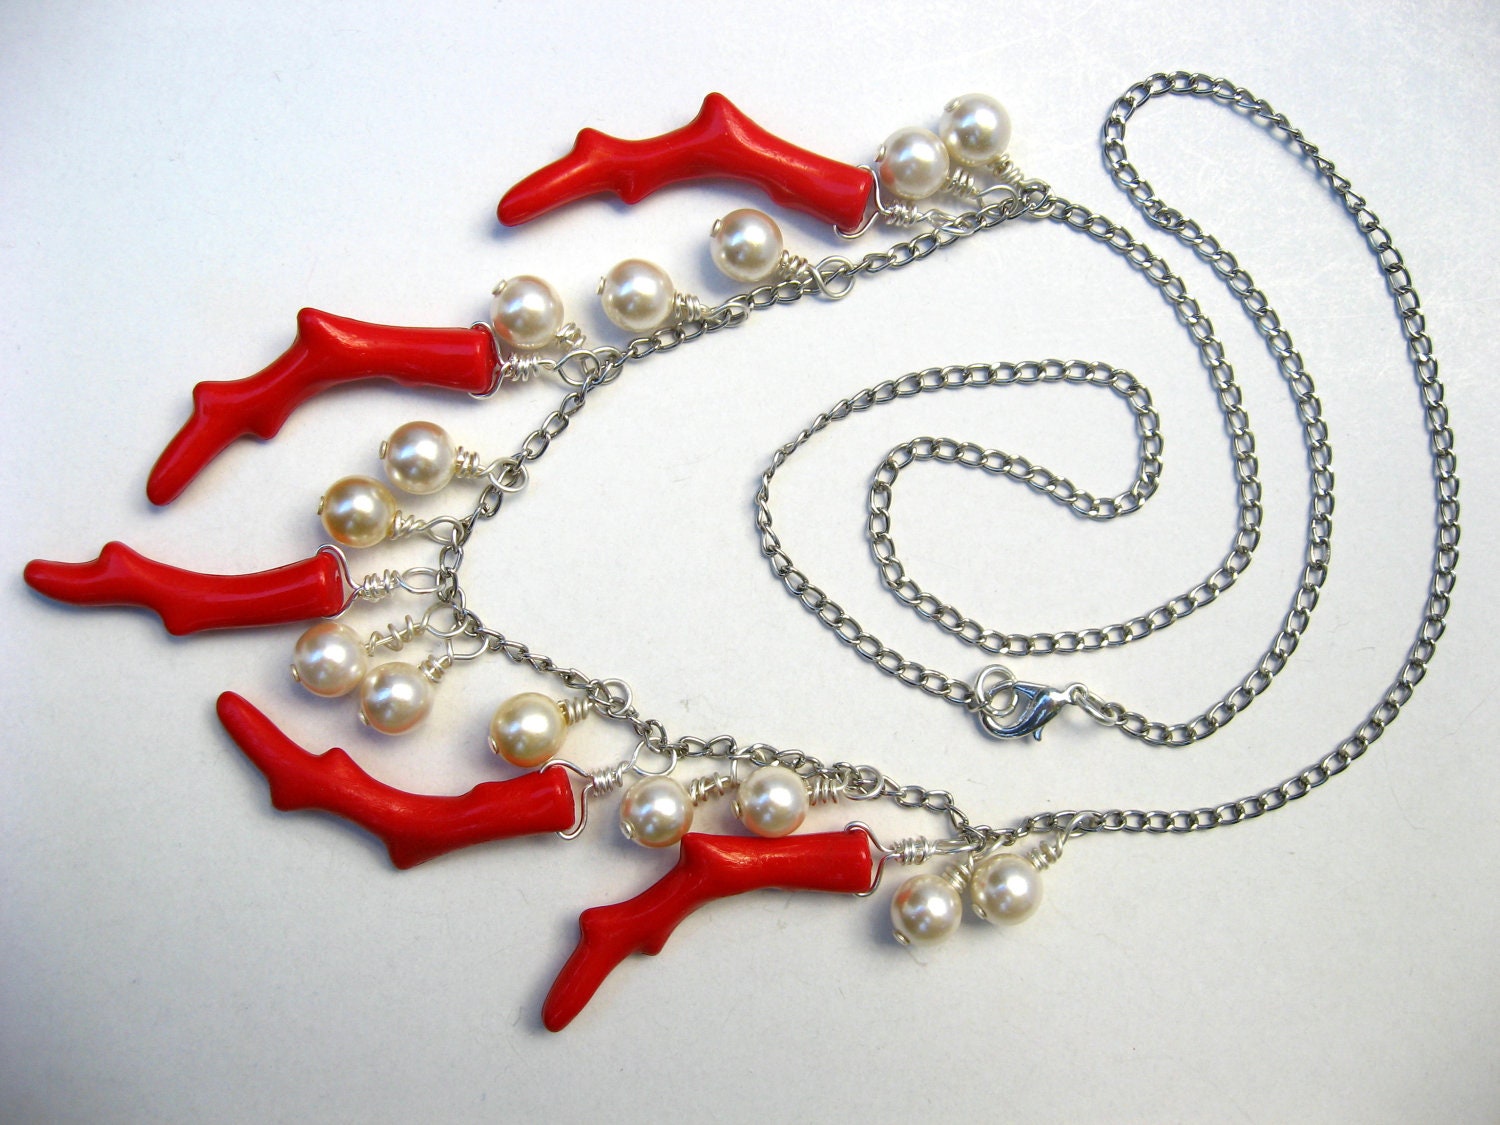 Coral Branch Necklace w/ Pearl Charm, Chain Bead Necklace, Wire Wrap, Playful Necklace